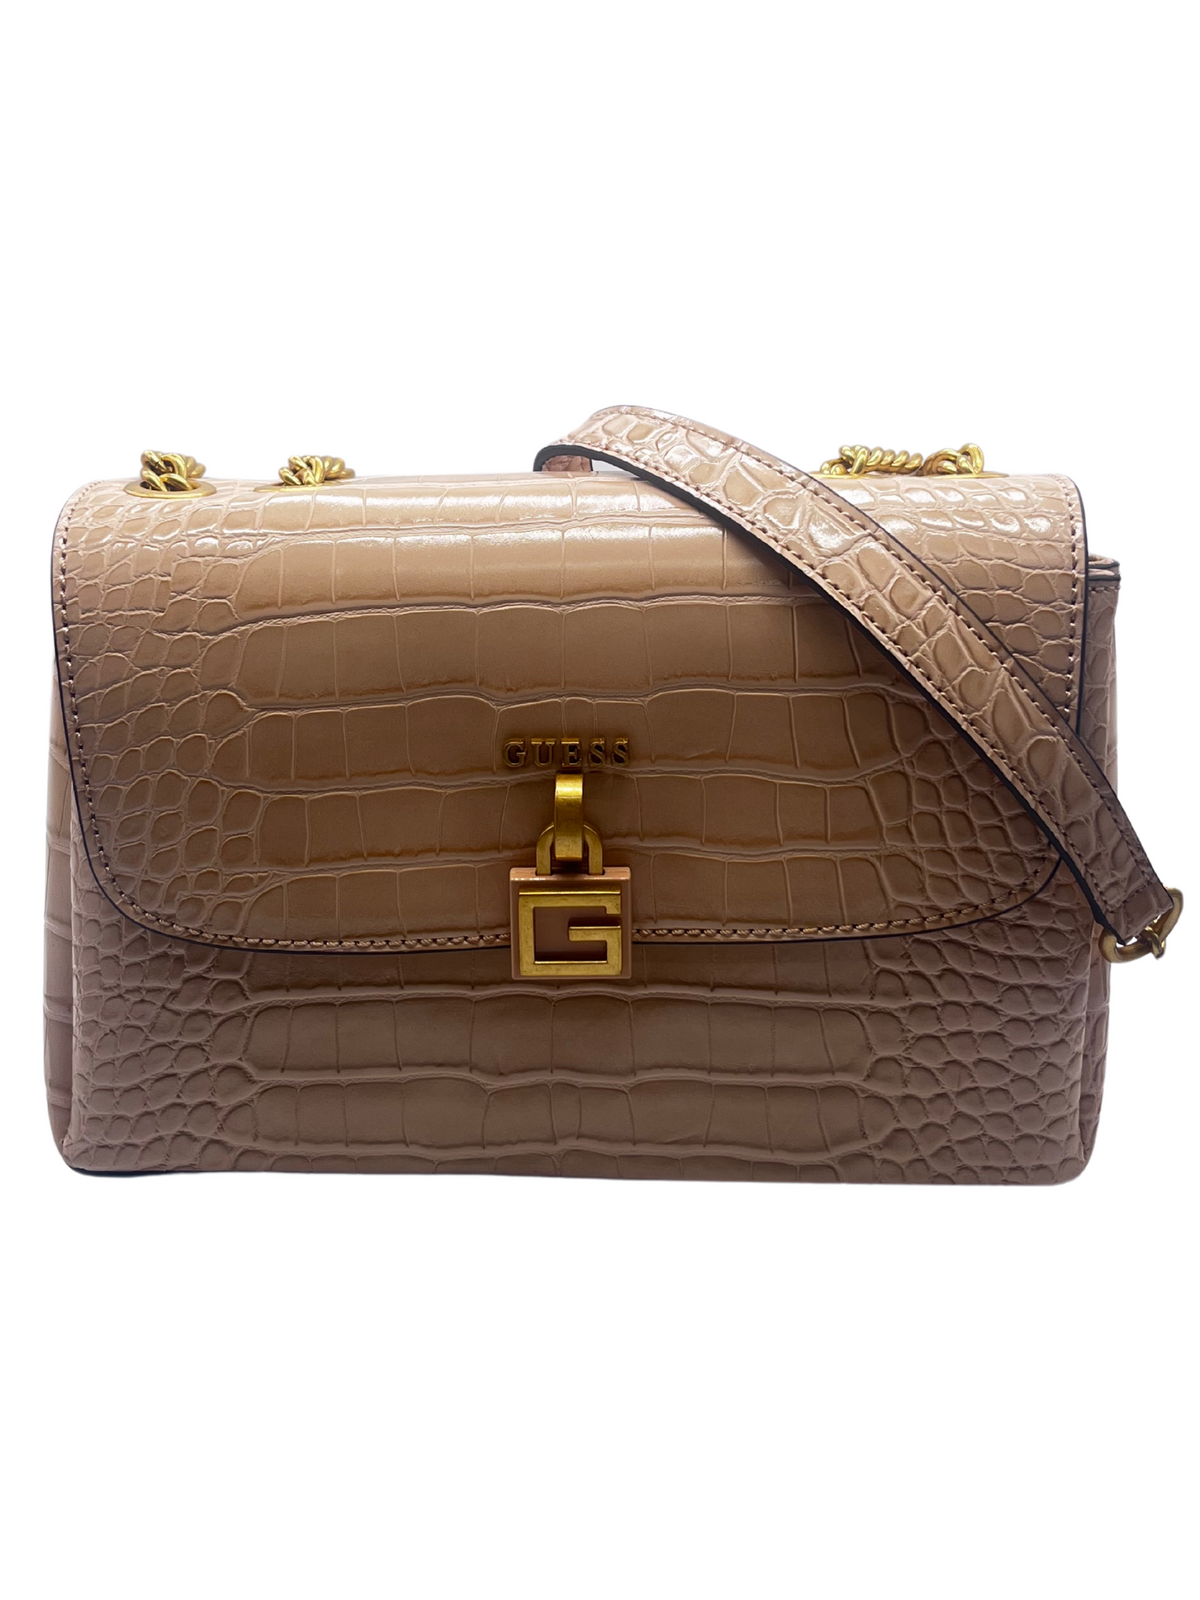 Guess Taupe Crossbody Bag